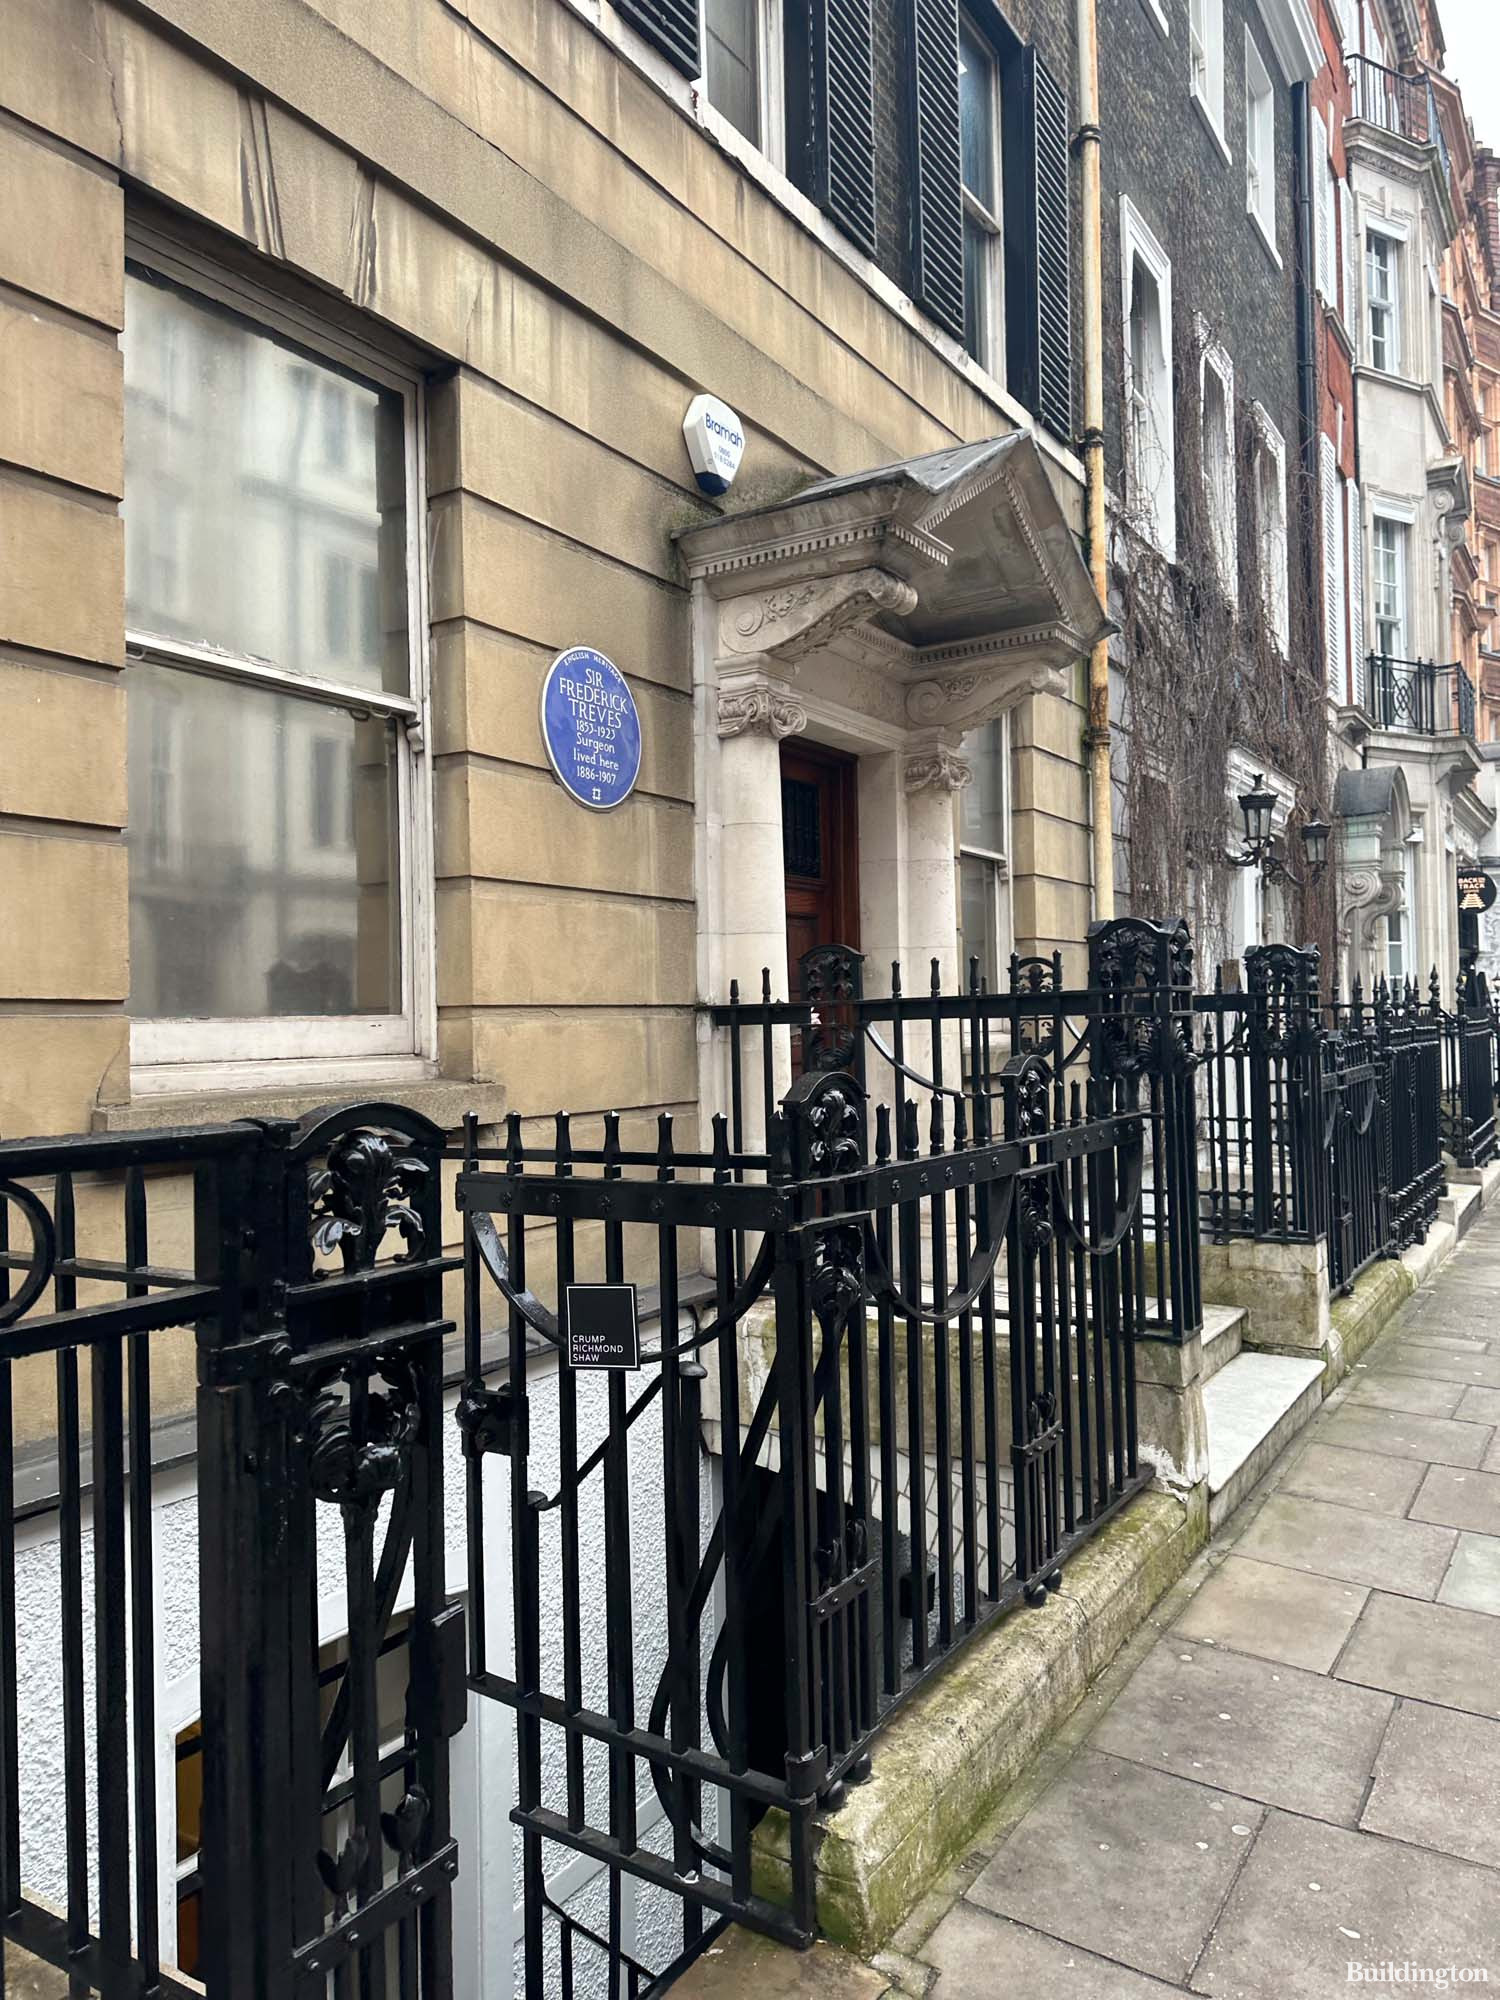 Sir Frederick Treves blue plaque next to the entrance to 6 Wimpole Street in Marylebone, London W1.